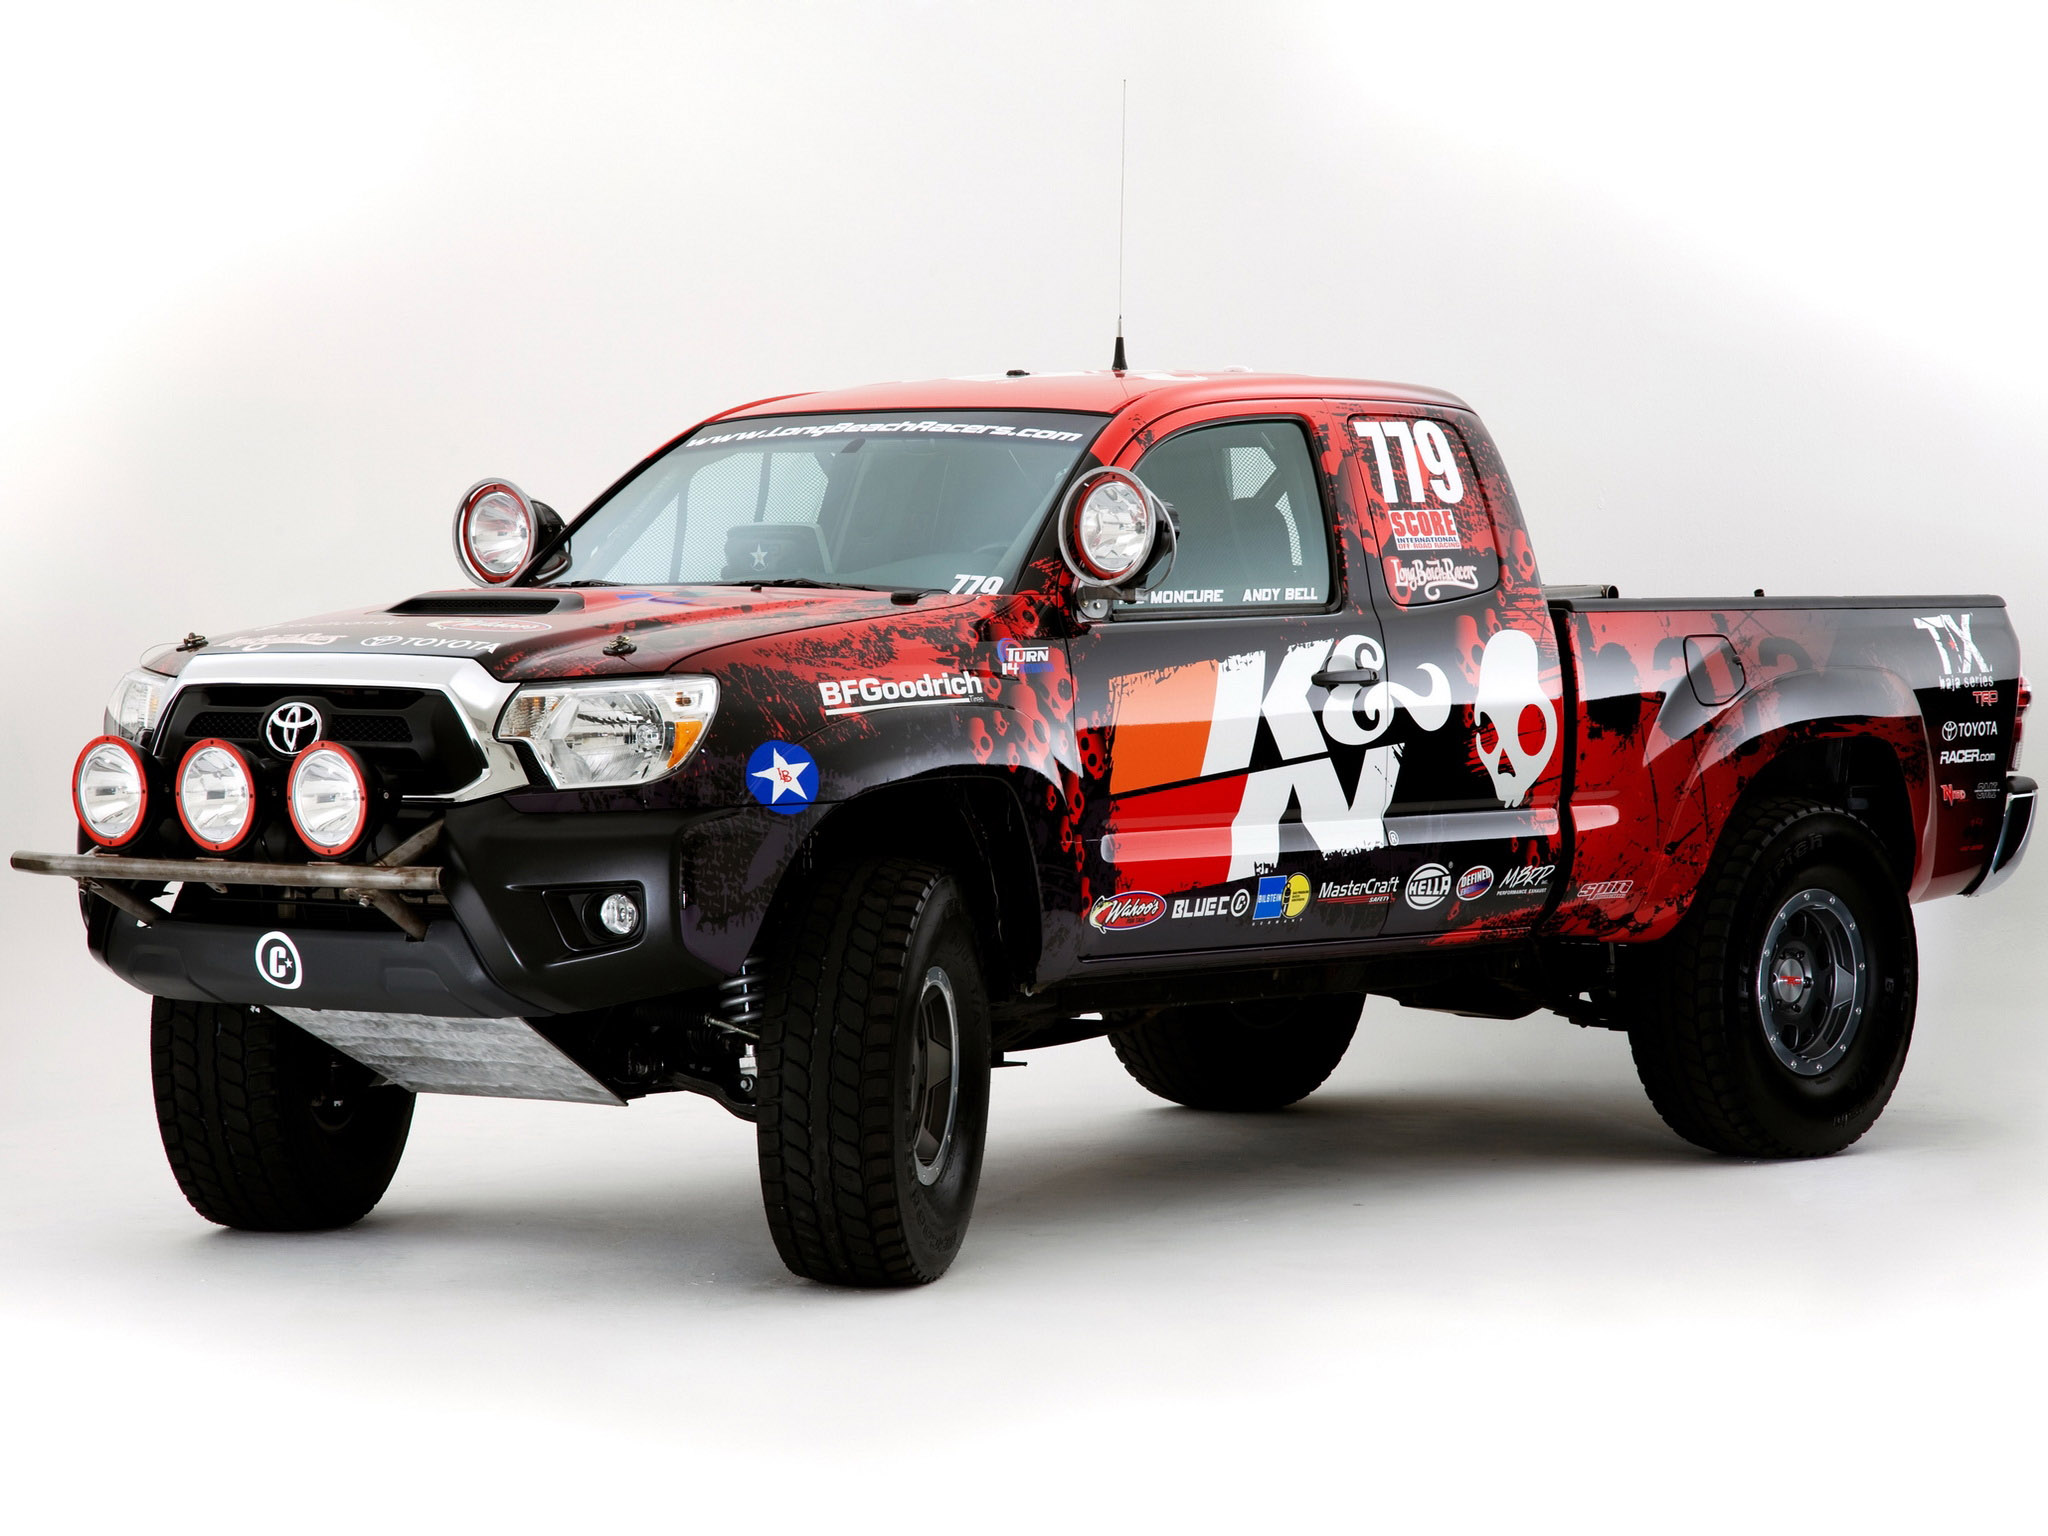 2011, Toyota, Tacoma, Truck, 4x4, Offroad, Race, Racing Wallpaper